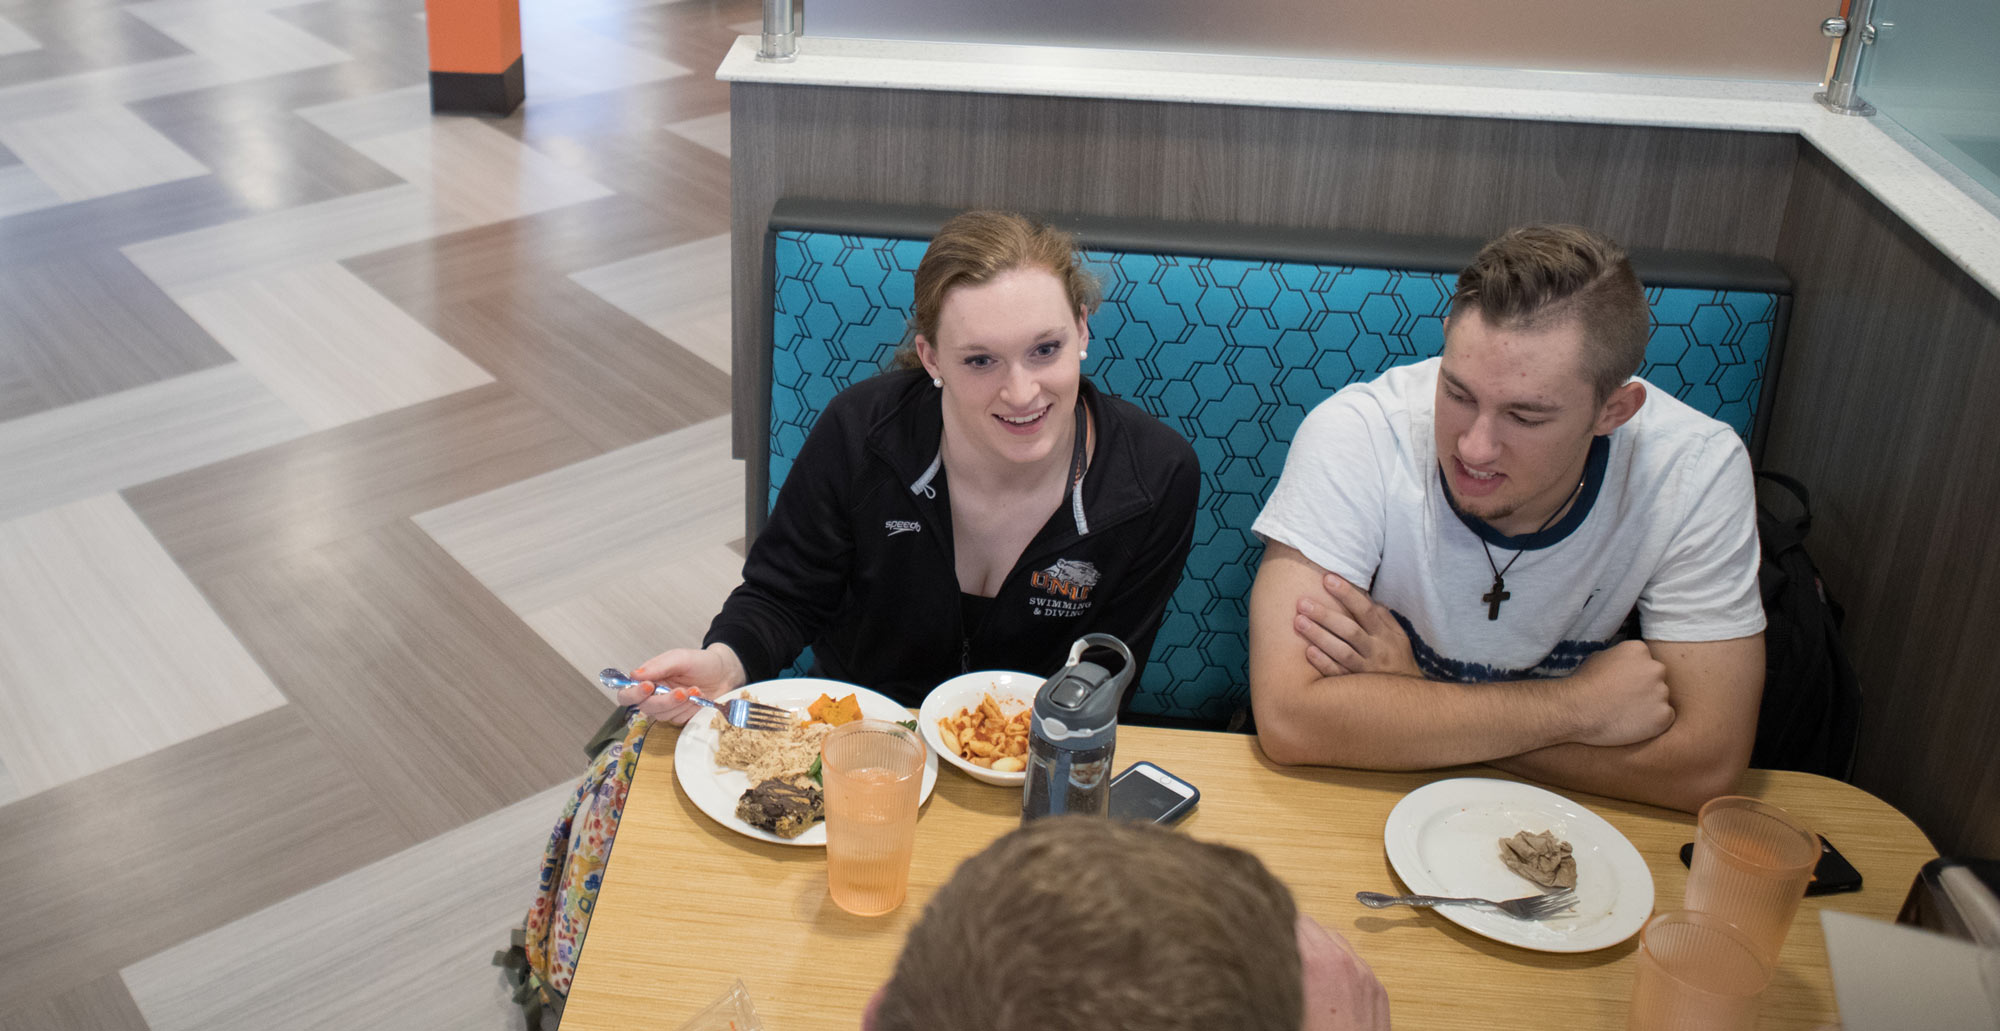 Freshmen Abby Leatherwood and Seth Darrah eat lunch in the dinning hall.